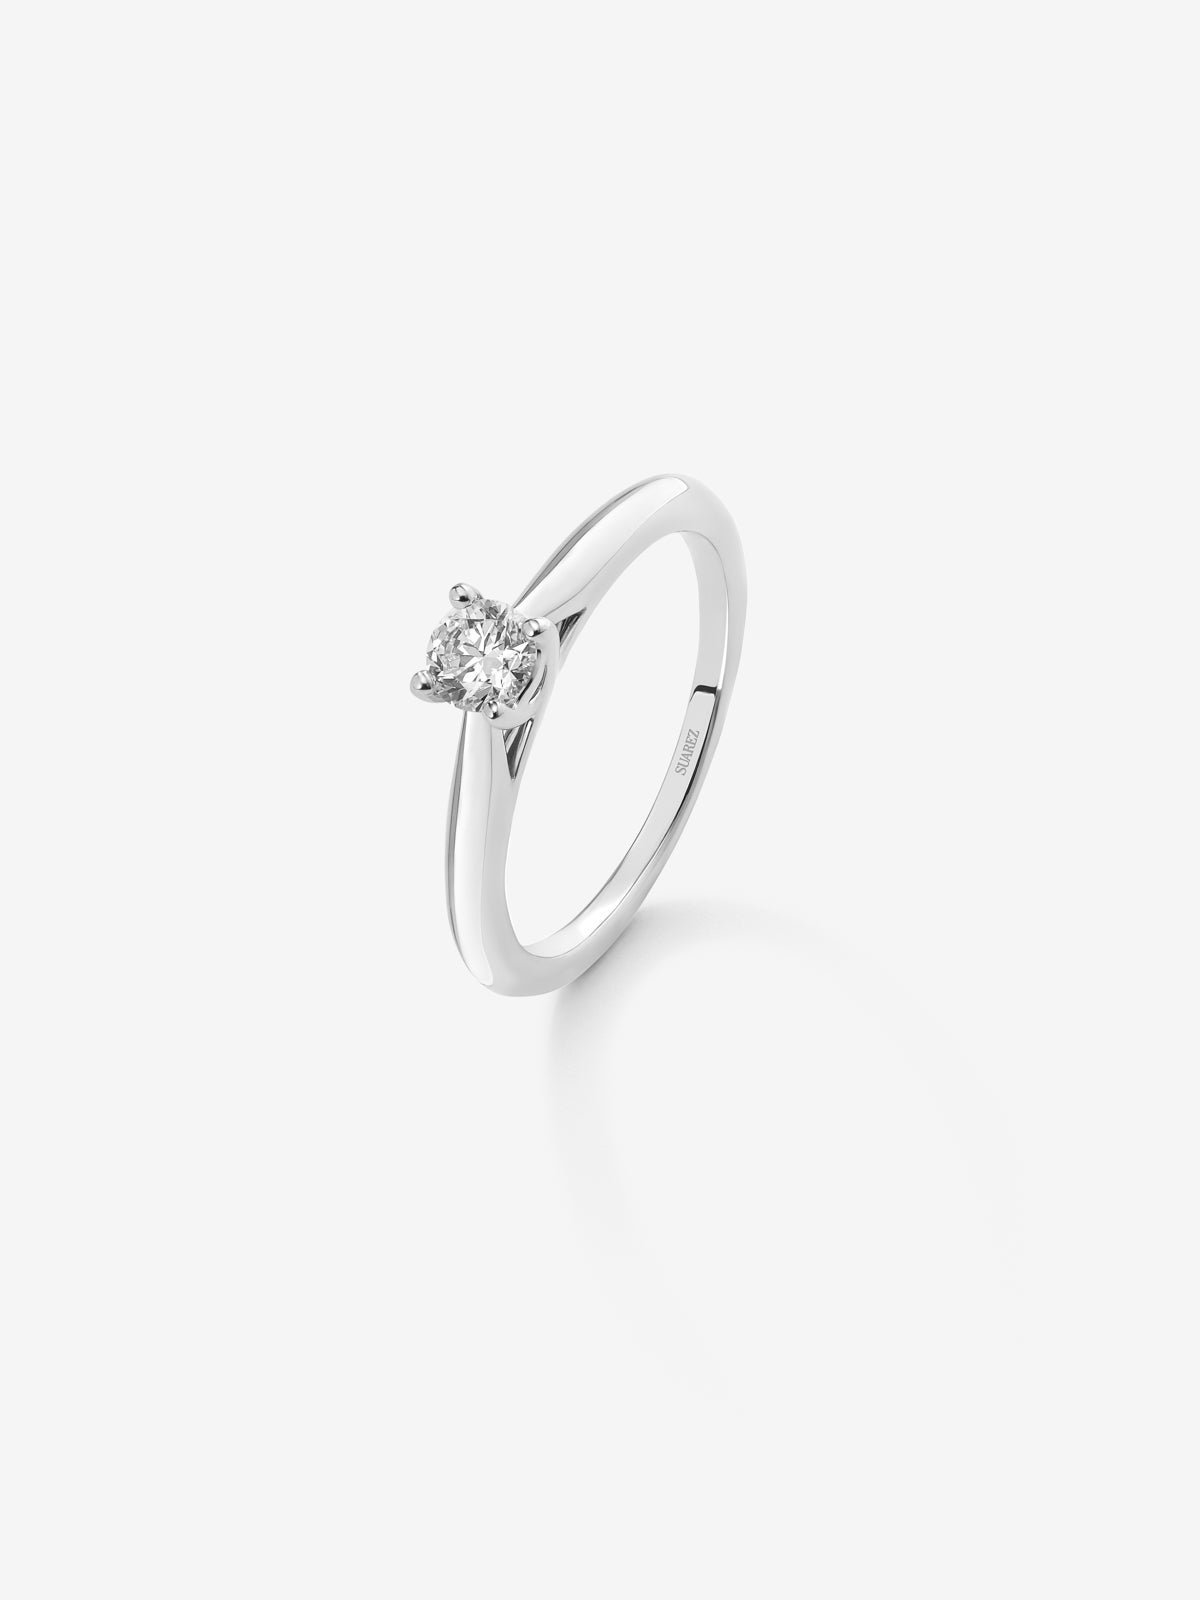 18K white gold solitaire ring with 0.4 ct brilliant-cut white diamond